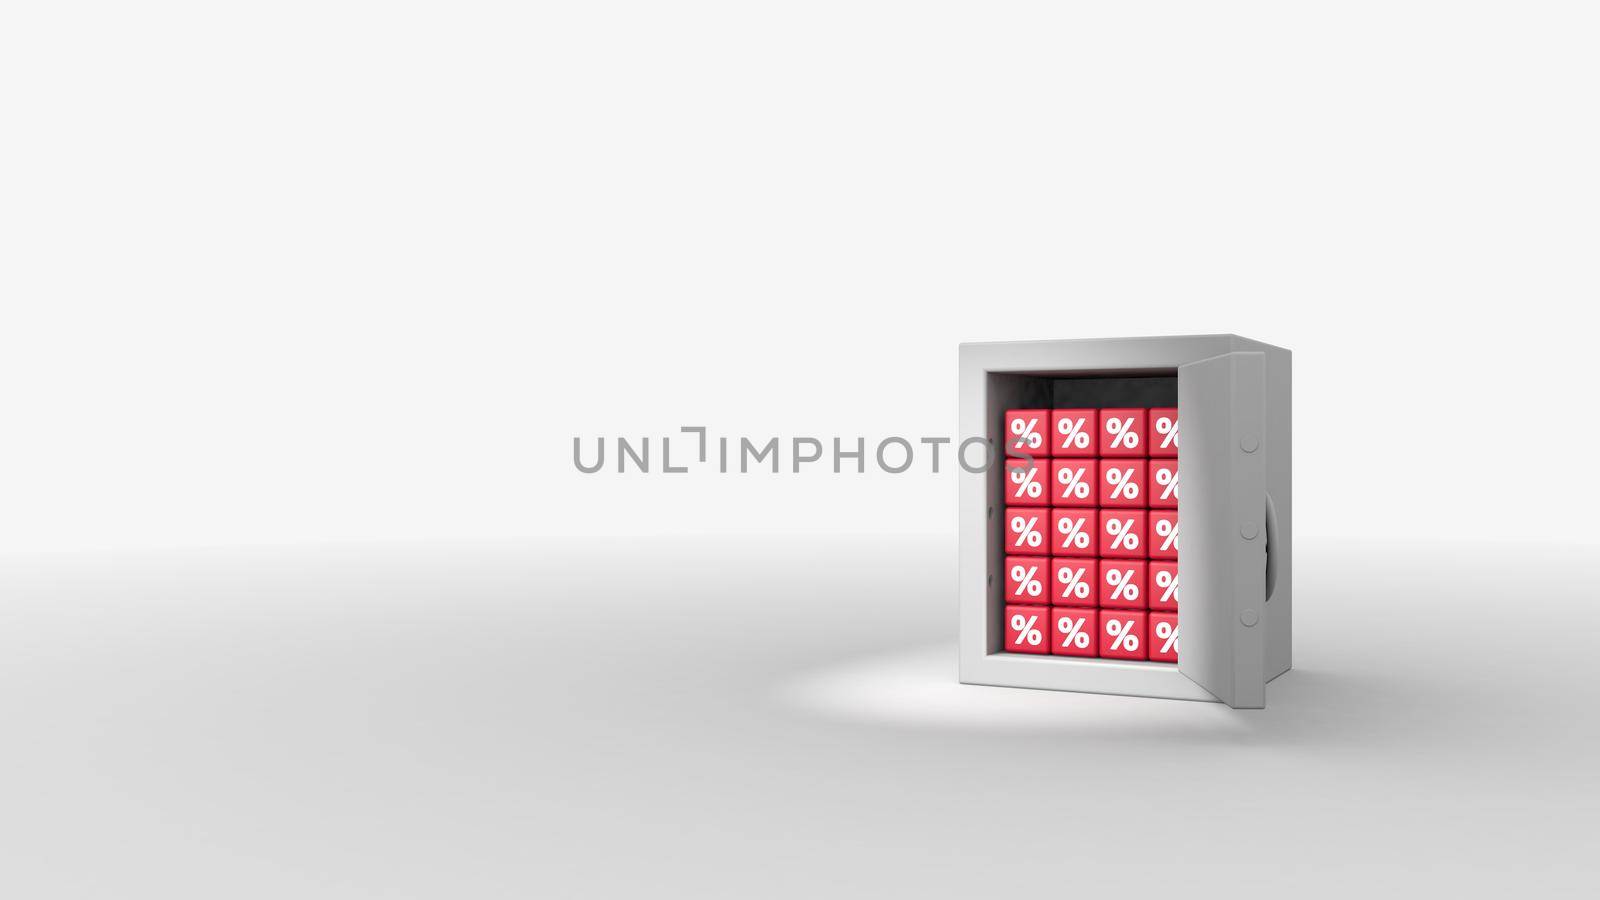 3d render of opening a safe, from which savings are falling. Bank interest, investment fund.